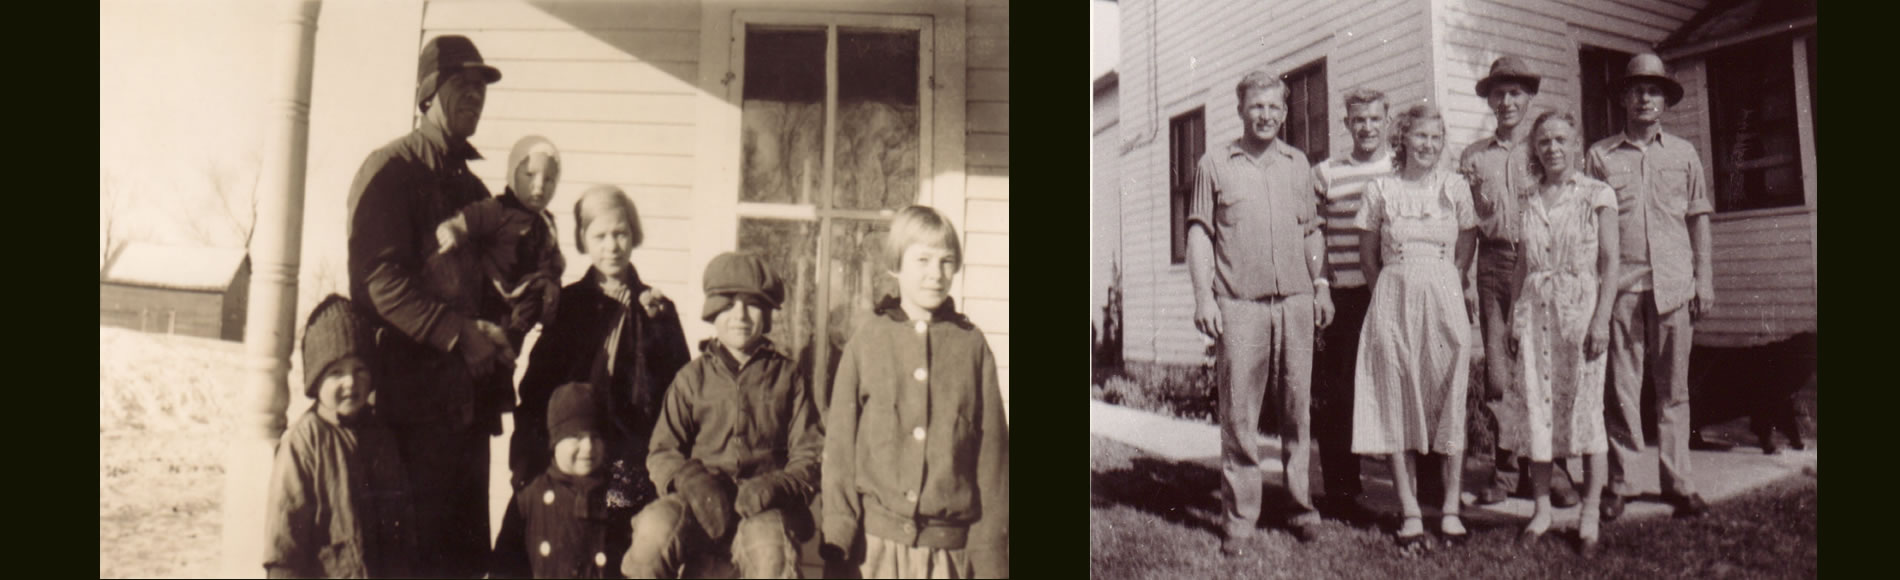 Blixrud Kids - 1928 and 1949